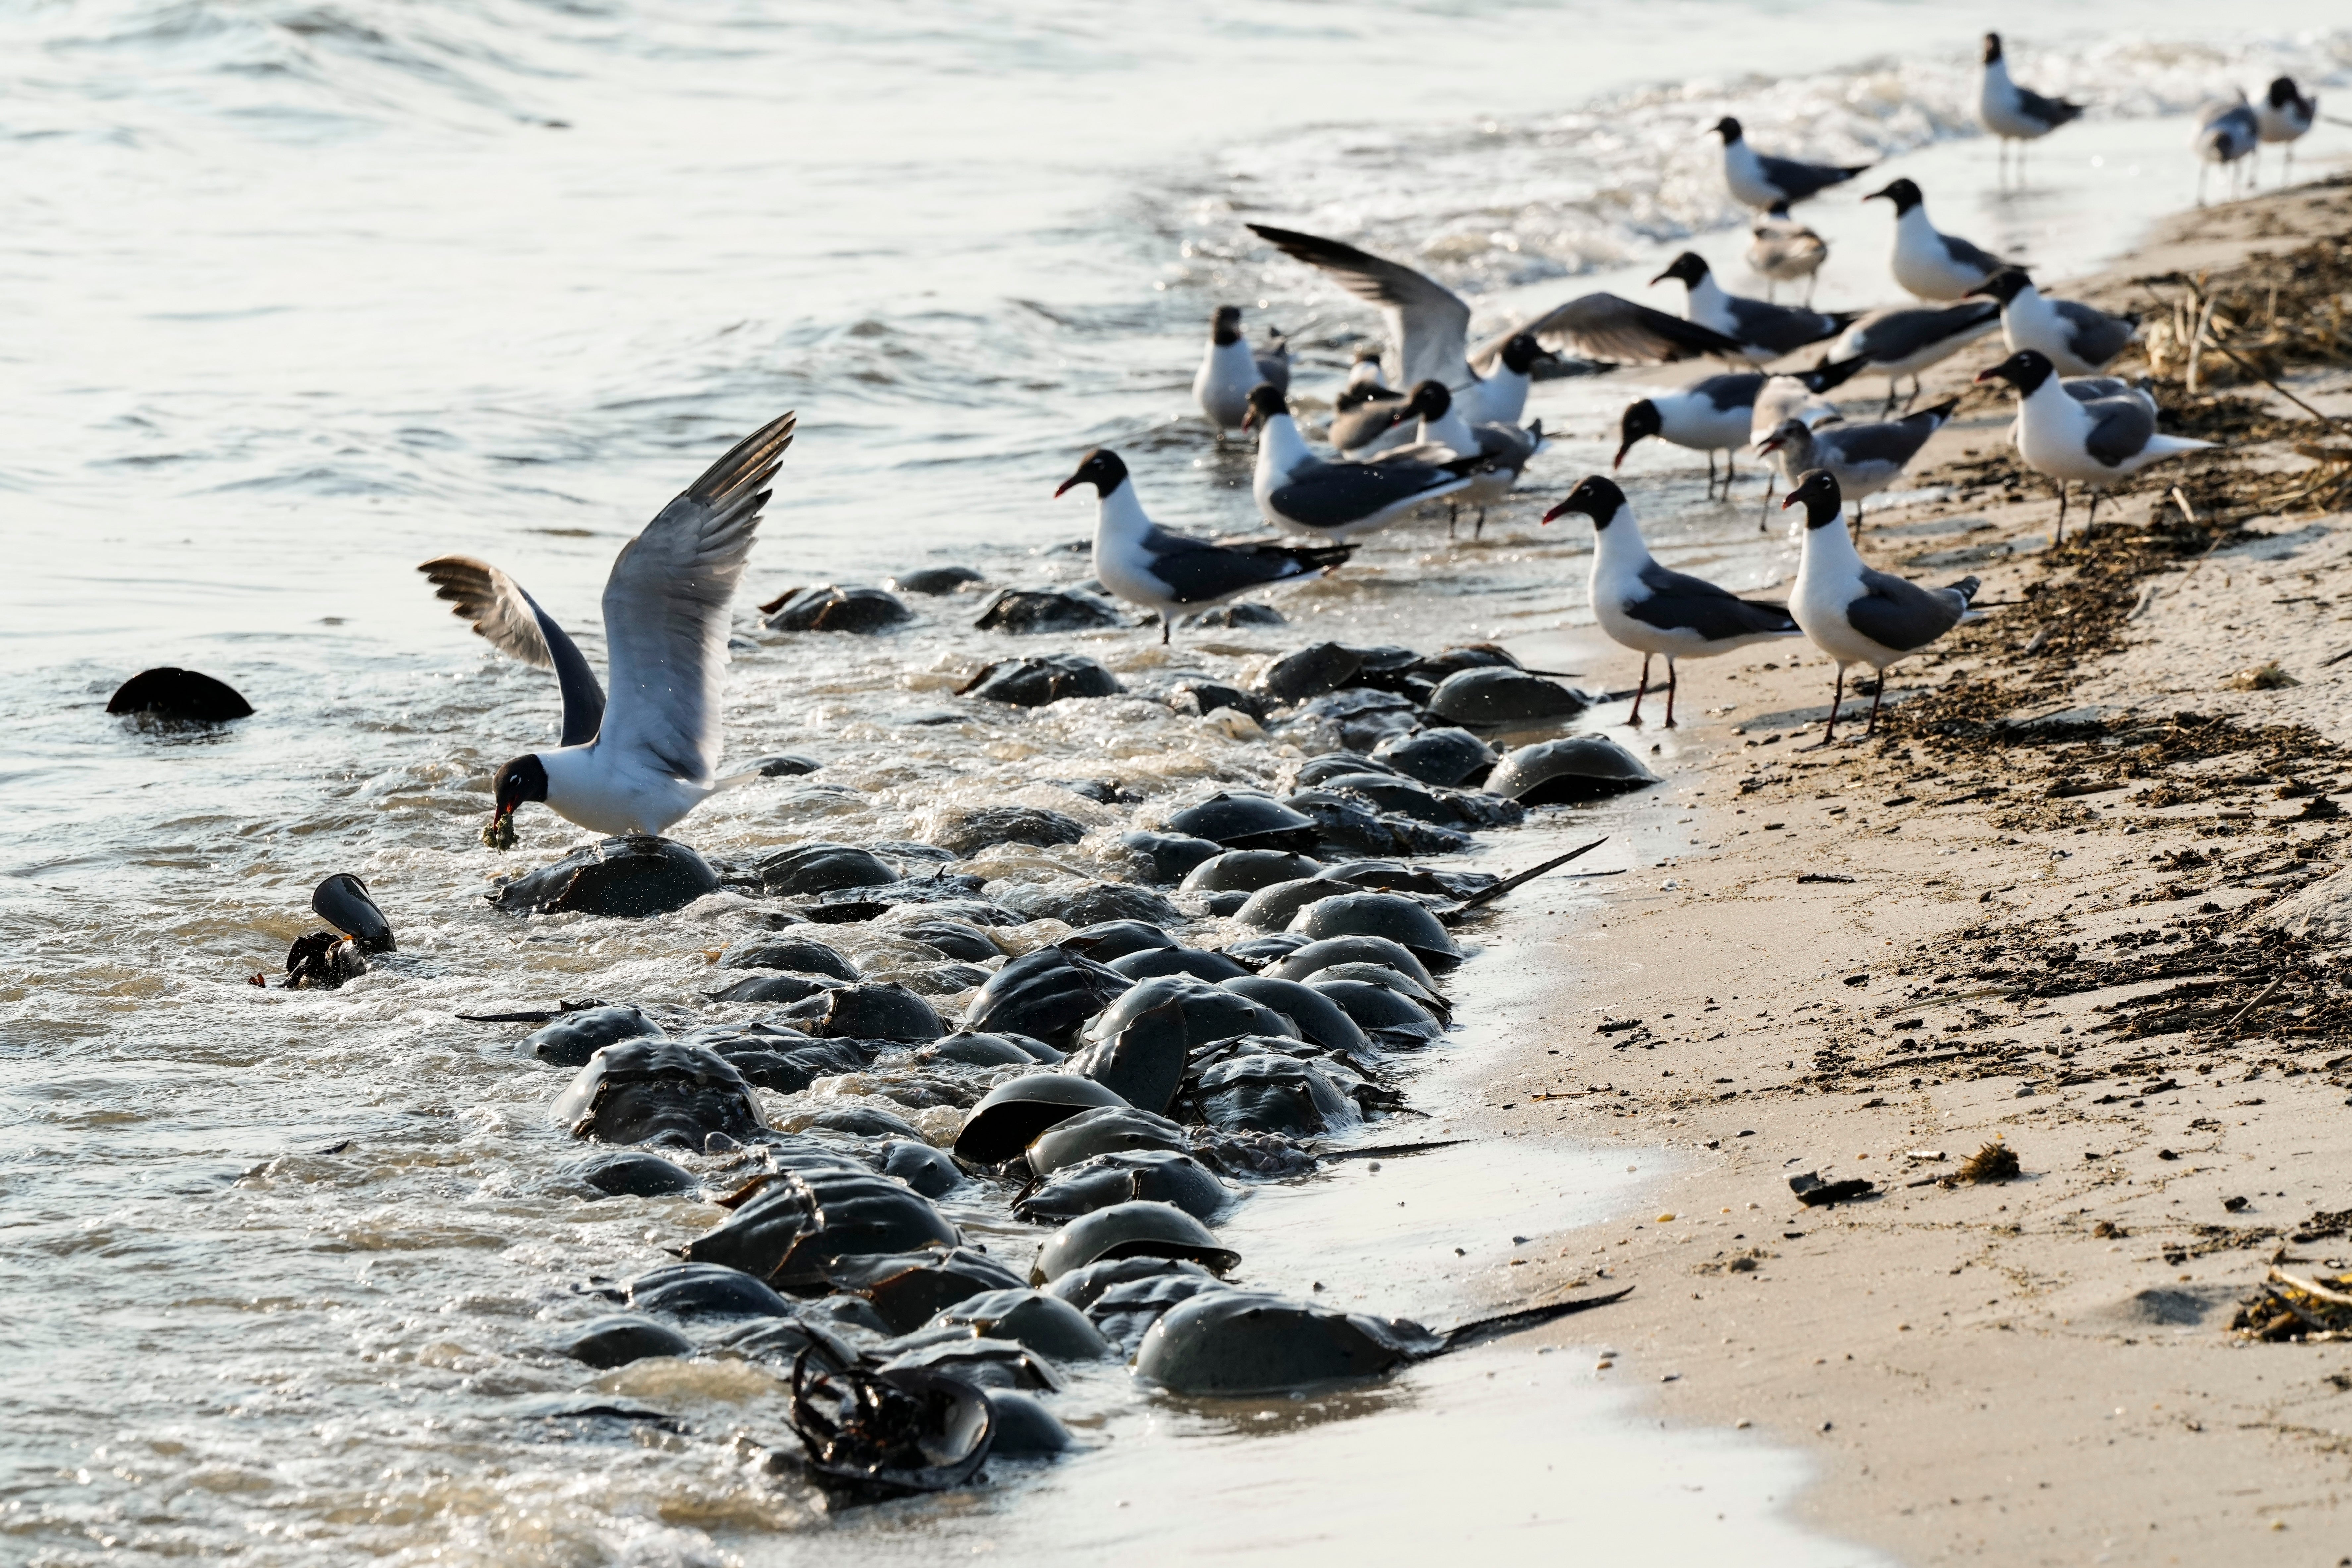 Gulls gather around horseshoe crabs spawning at Reeds Beach in Cape May Court House